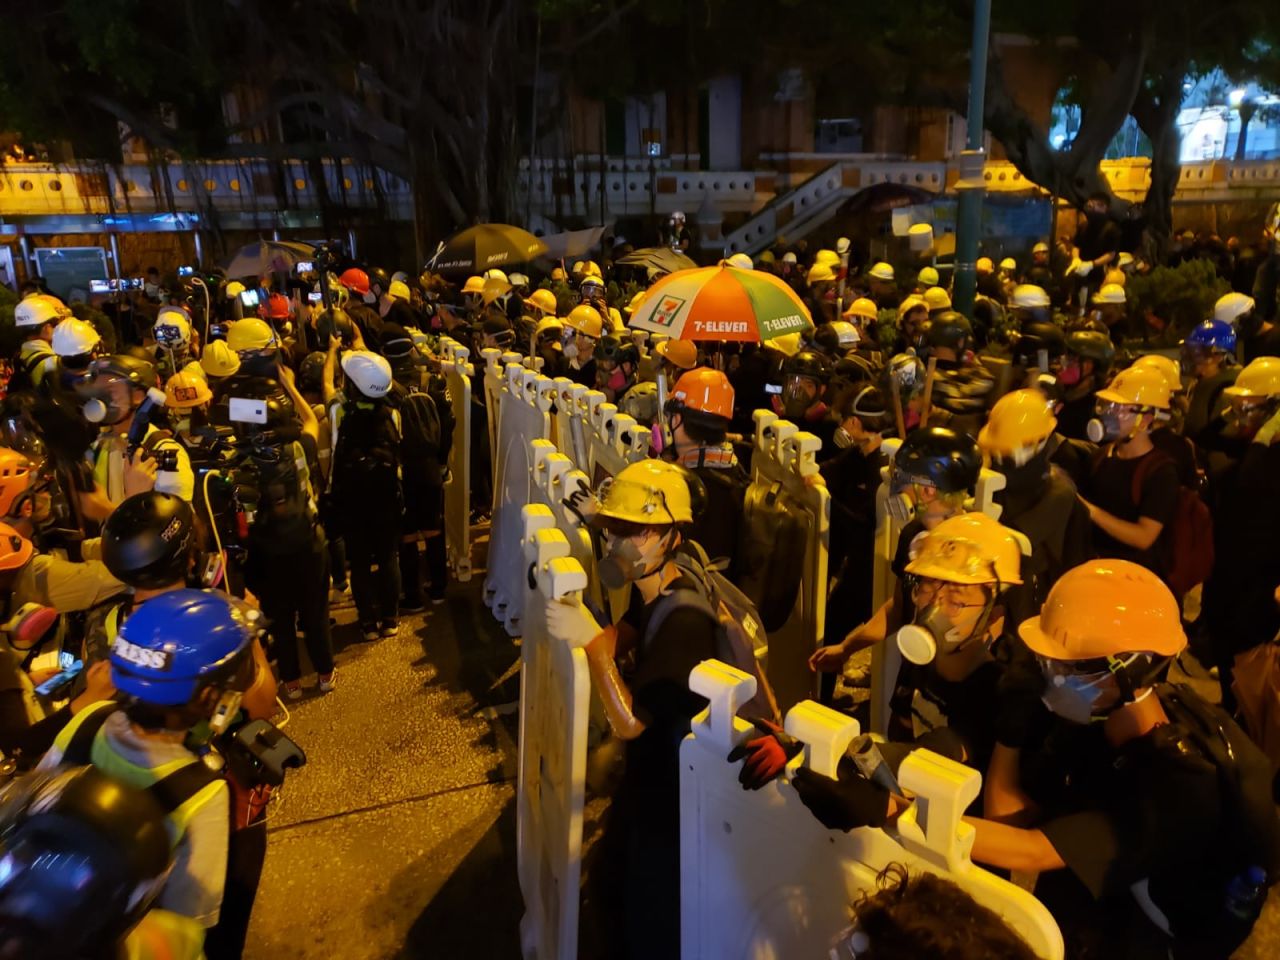 Protesters erect plastic street barriers as shields as they face off with police.